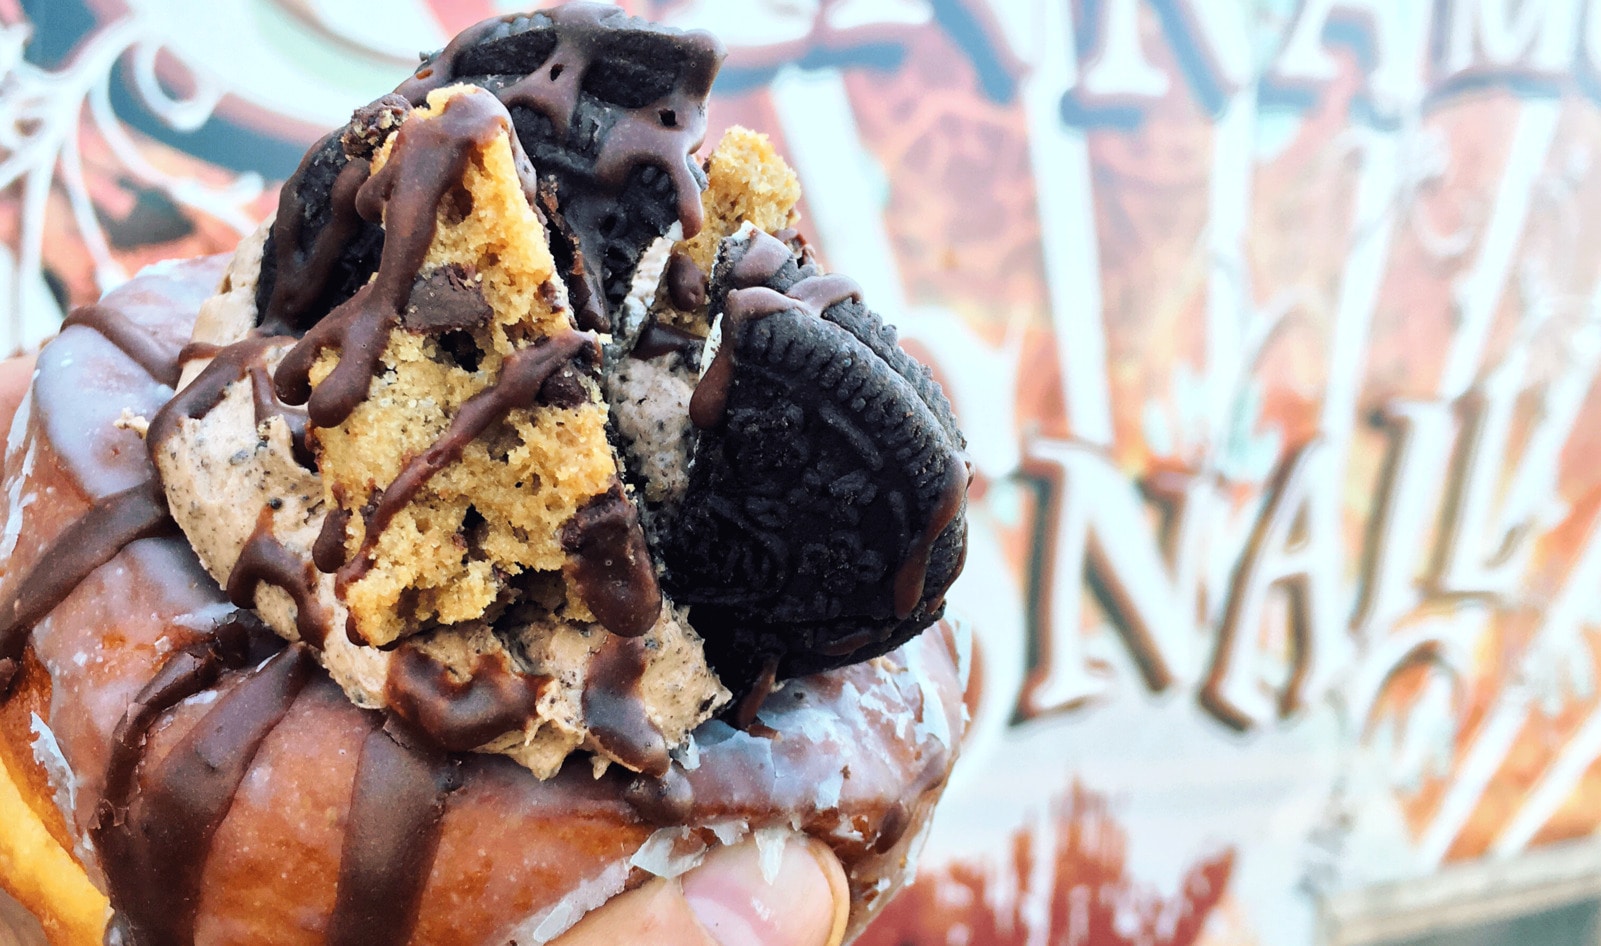 Cinnamon Snail Vegan Food Truck Returns to NYC After Four Years